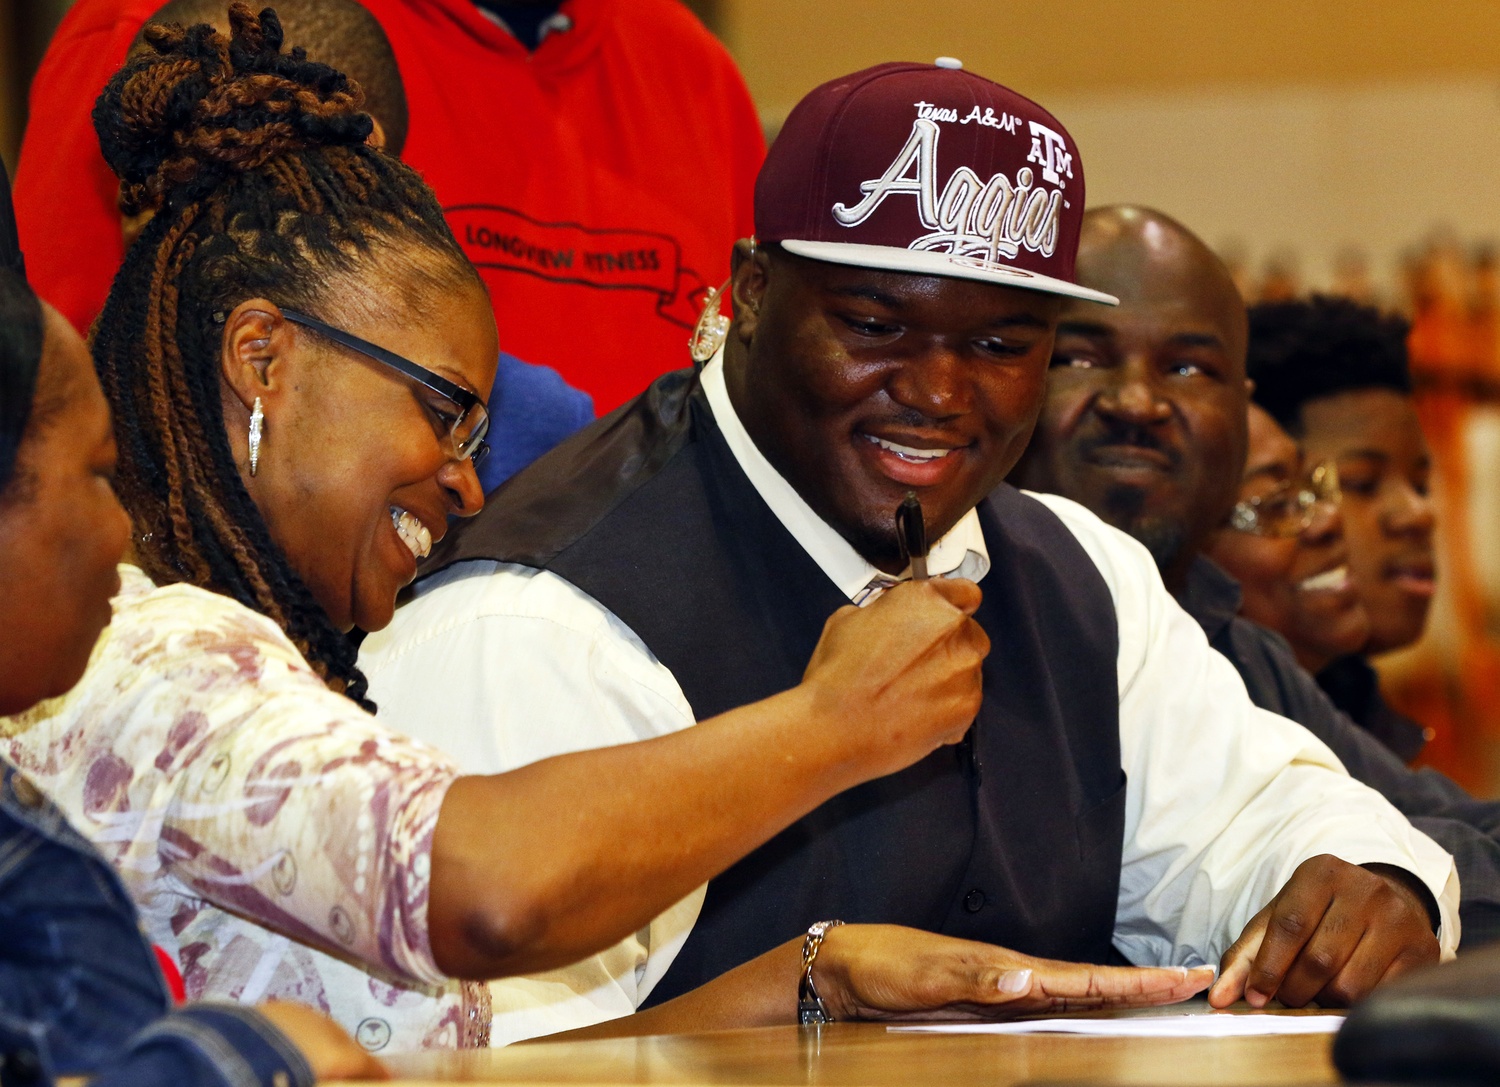 Feb 4, 2015; Gladewater, TX, USA; Daylon Mack signs his national letter of intent to with his mom Geraci Mack (left) and his dad Coris Mack (right) by his side to play football at Texas A&M at Gladewater High School. Mandatory Credit: Ray Carlin-USA TODAY Sports